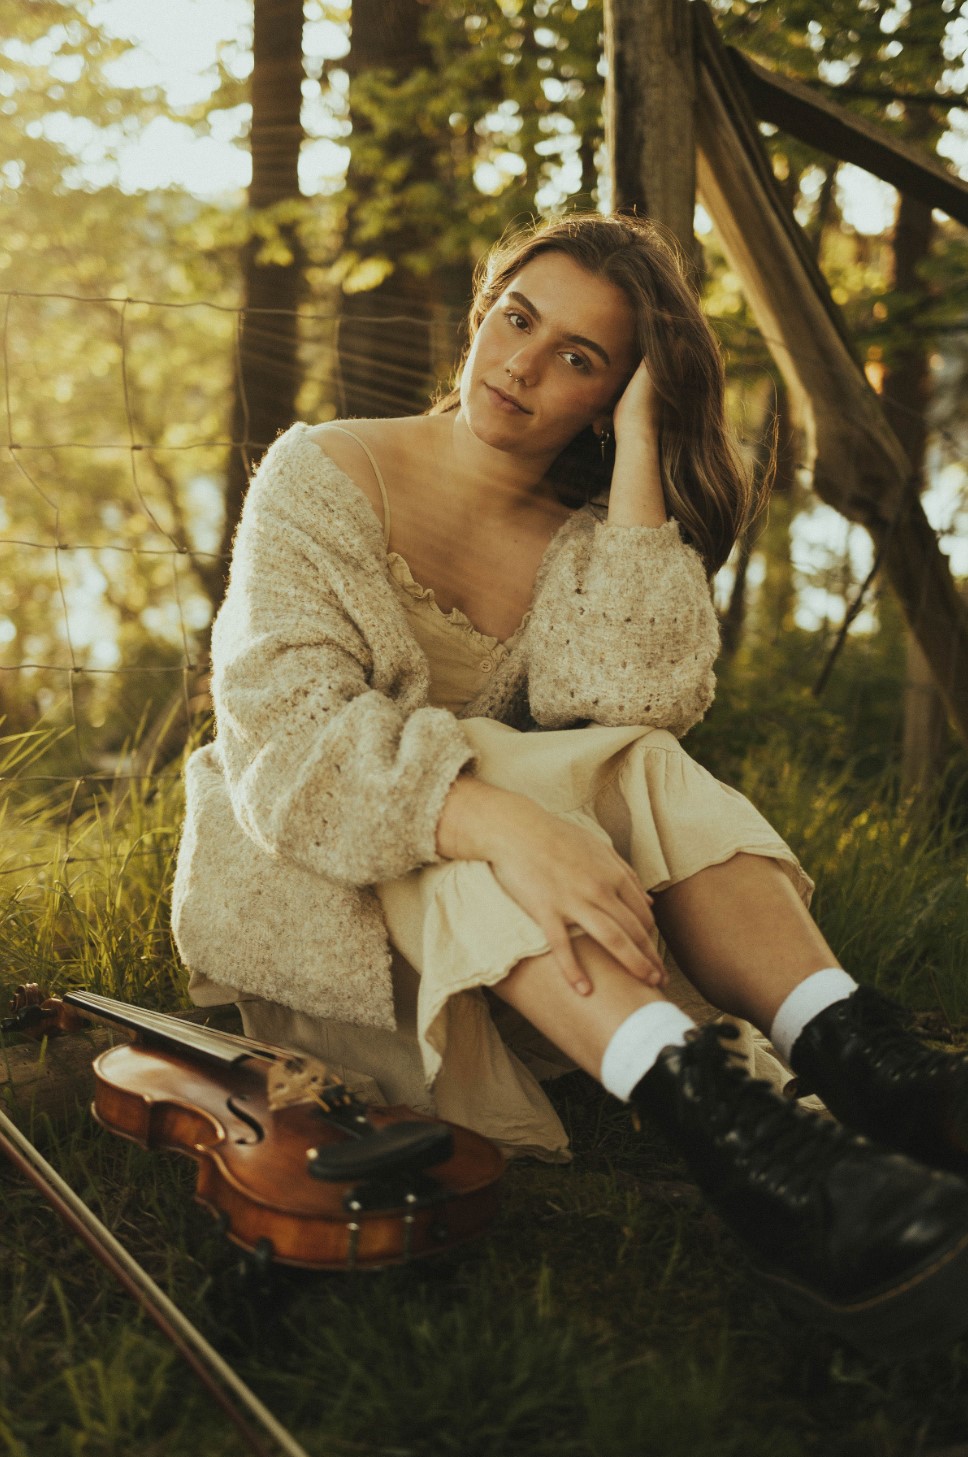 A person sitting peacefully on the grass next to a violin, and against a fence in a warm, woodsy setting